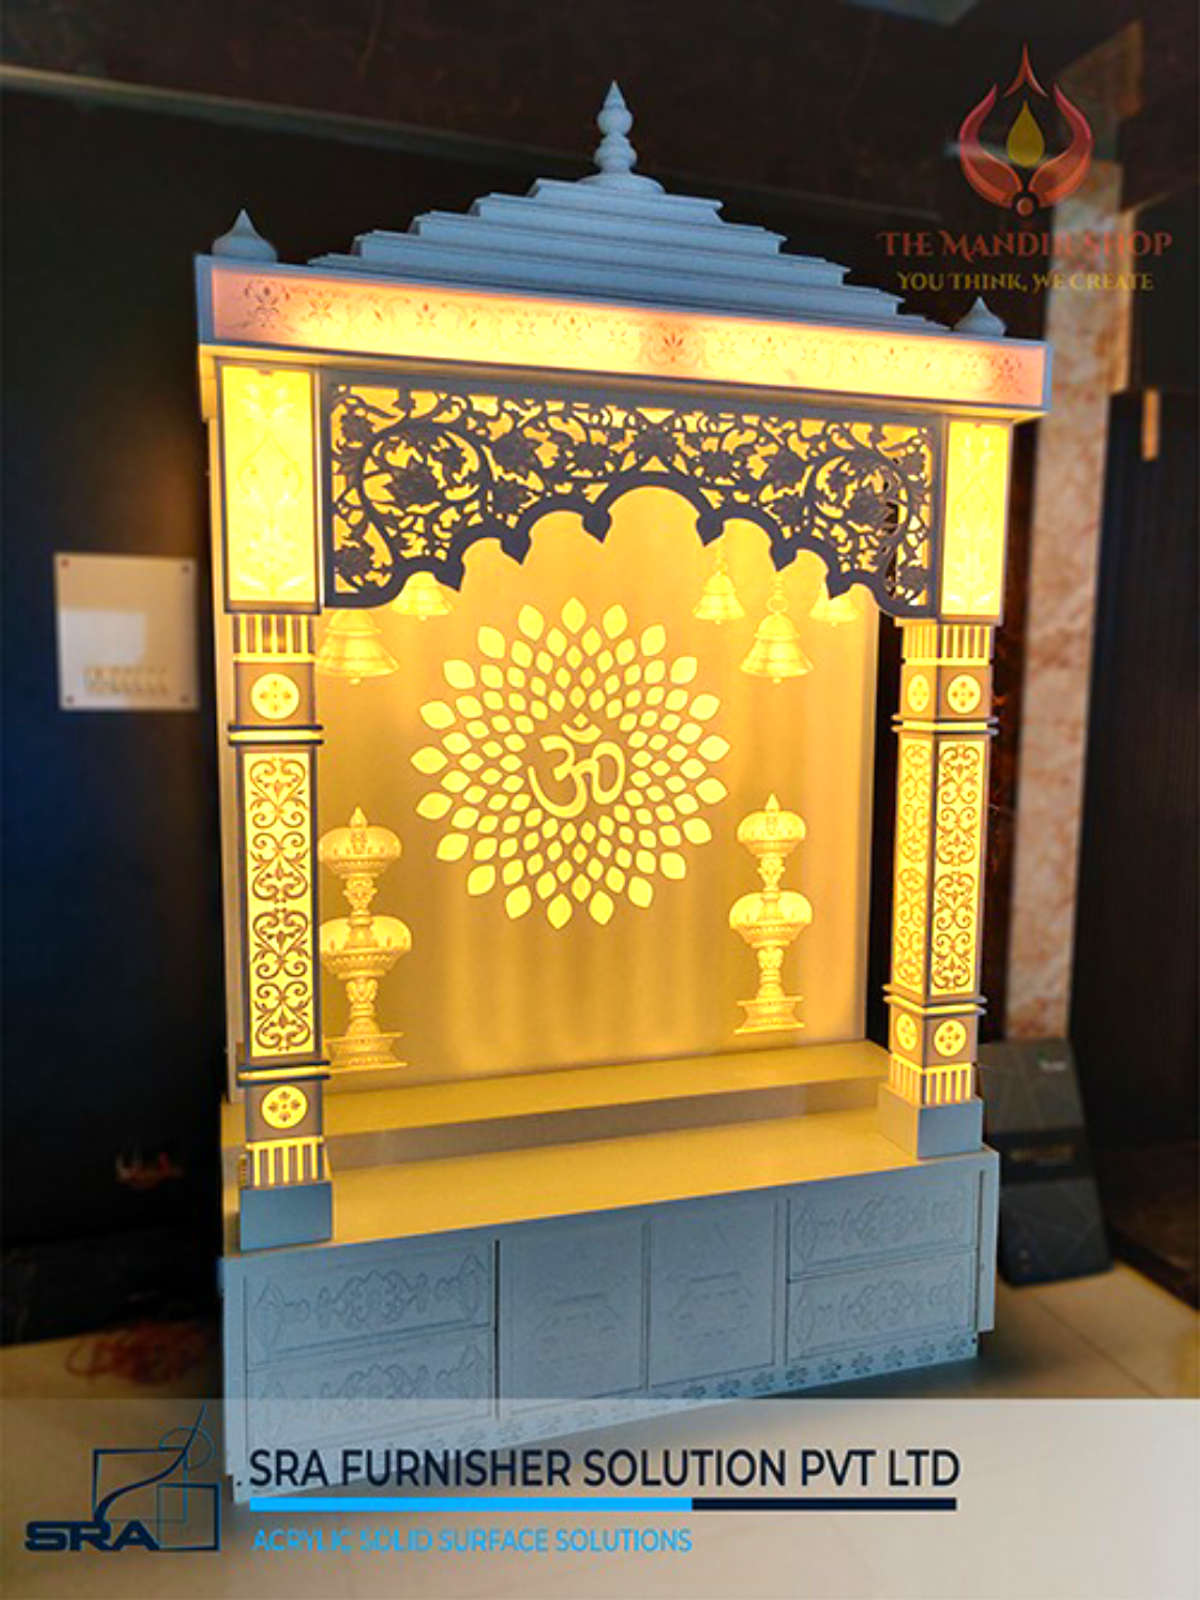 Corian Designer Mandir with Backlit
Searching Temple, Don’t worry you are just one call away  9953700622, 9560748602

Size (L x D x H ):60″ x 24″ x 102″
Durability: Stain Resistance: Sheets, Fungus and Bacteria Resistance, Boiling Water Resistant, High Temperature Resistance, sturdy, durable mandir
Lighting: Long Lasting, Hi illumination LED lighting
Cleaning: Easy to Clean
Usage/Application: Residential, Industrial & Commercial
Provide Installation: Yes
Corian Designer Mandir with Backlit 
 #corian  #corianmandir #architecture #interiordesign #fabrication #manufacturing #construction 
#bathroom #countertops #featurewall #backlit #lghausys #acrylicsolidsurface 
#solidsurface #interiordesigns #furnituremanufacturer #bathroomvanity #design  
#kitchendesign #interiordesigner #furniture #furniture #homedesign #corian   #temple